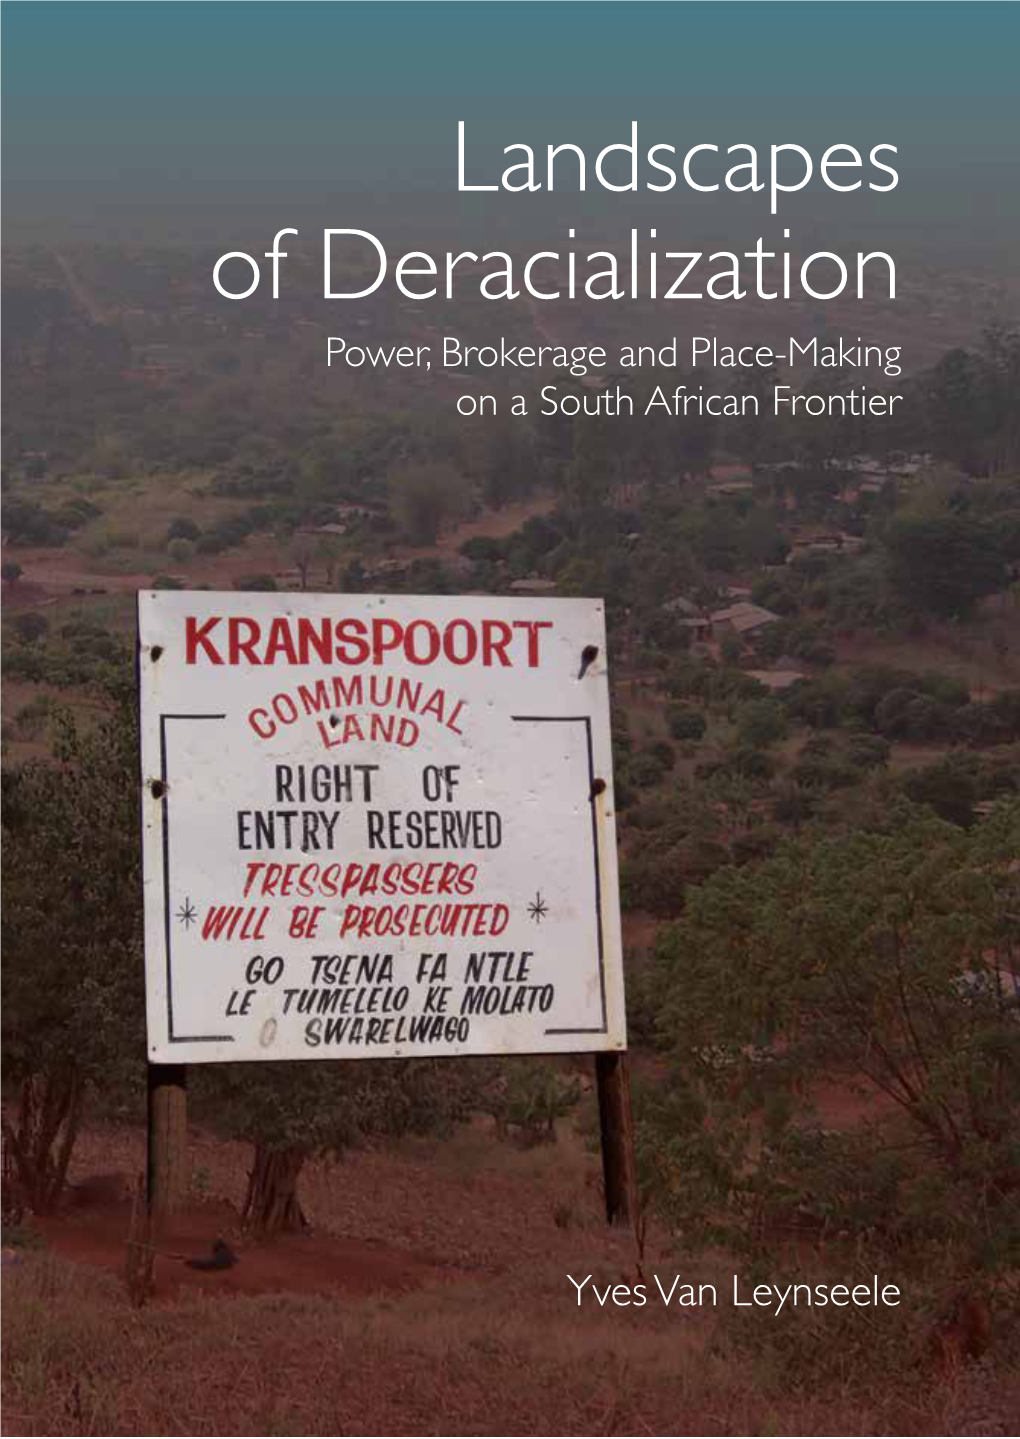 Landscapes of Deracialization Power, Brokerage and Place-Making on a South African Frontier